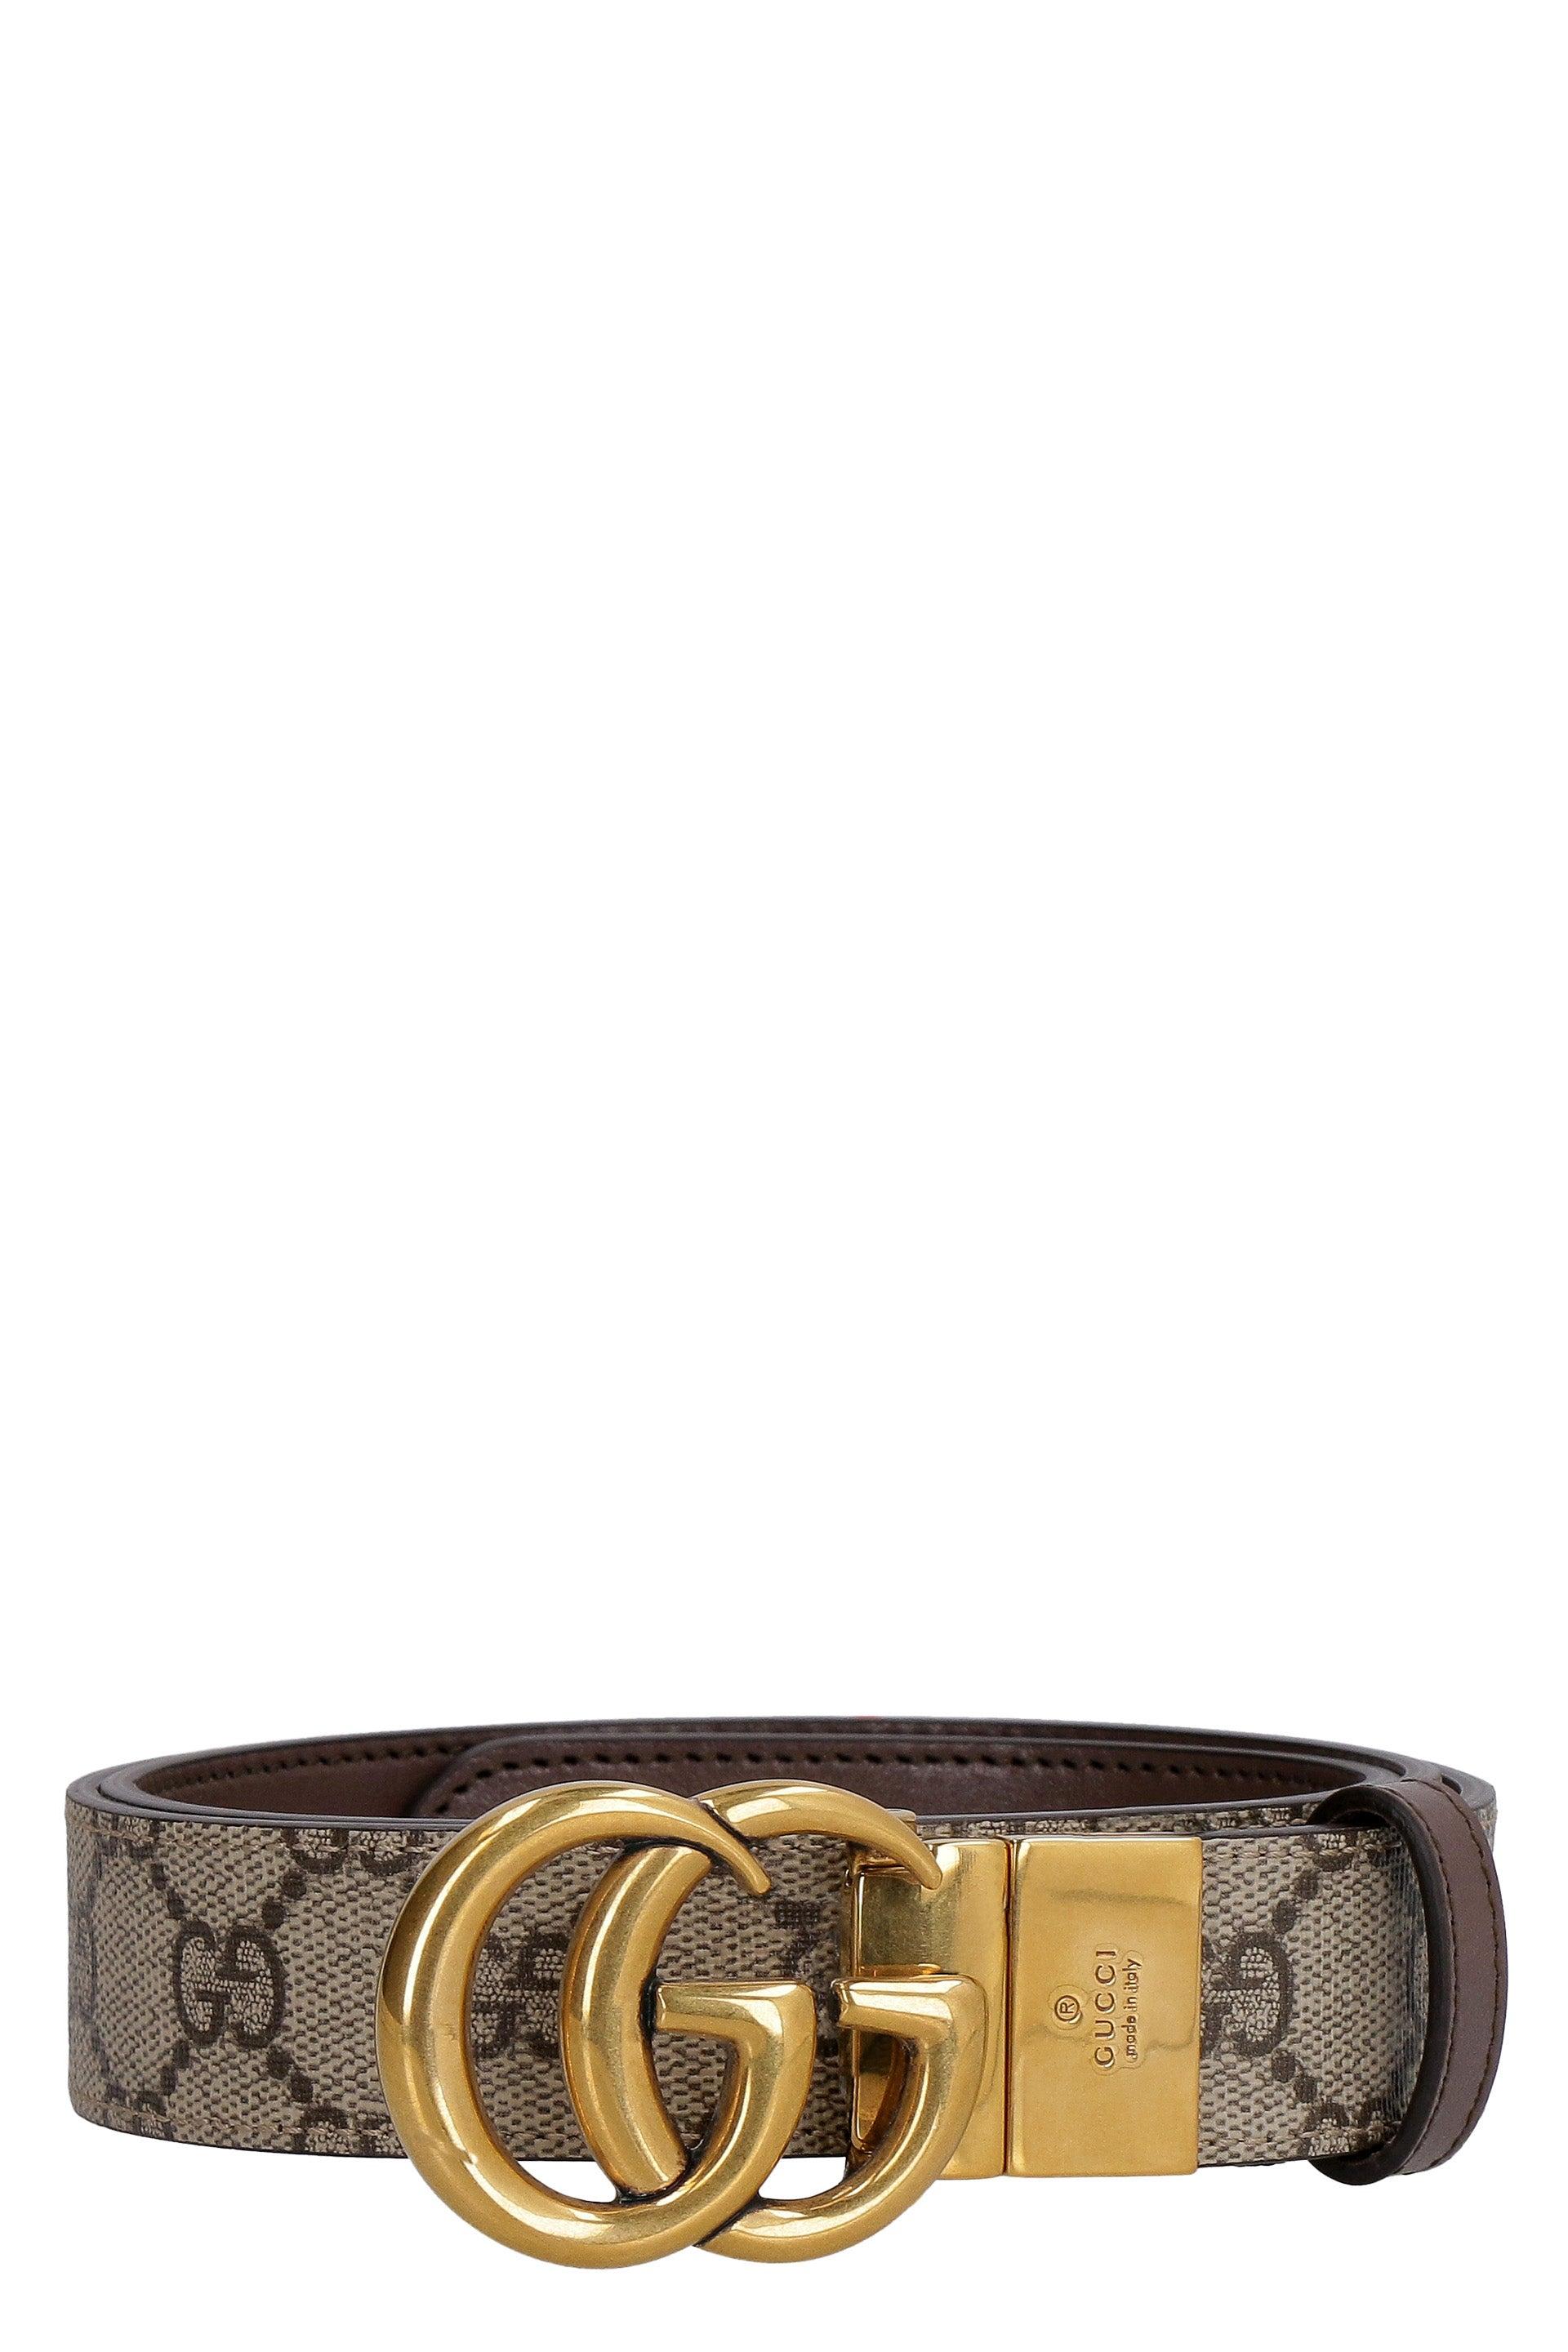 Gucci Leather And GG Supreme Fabric Reversible Belt | Lyst